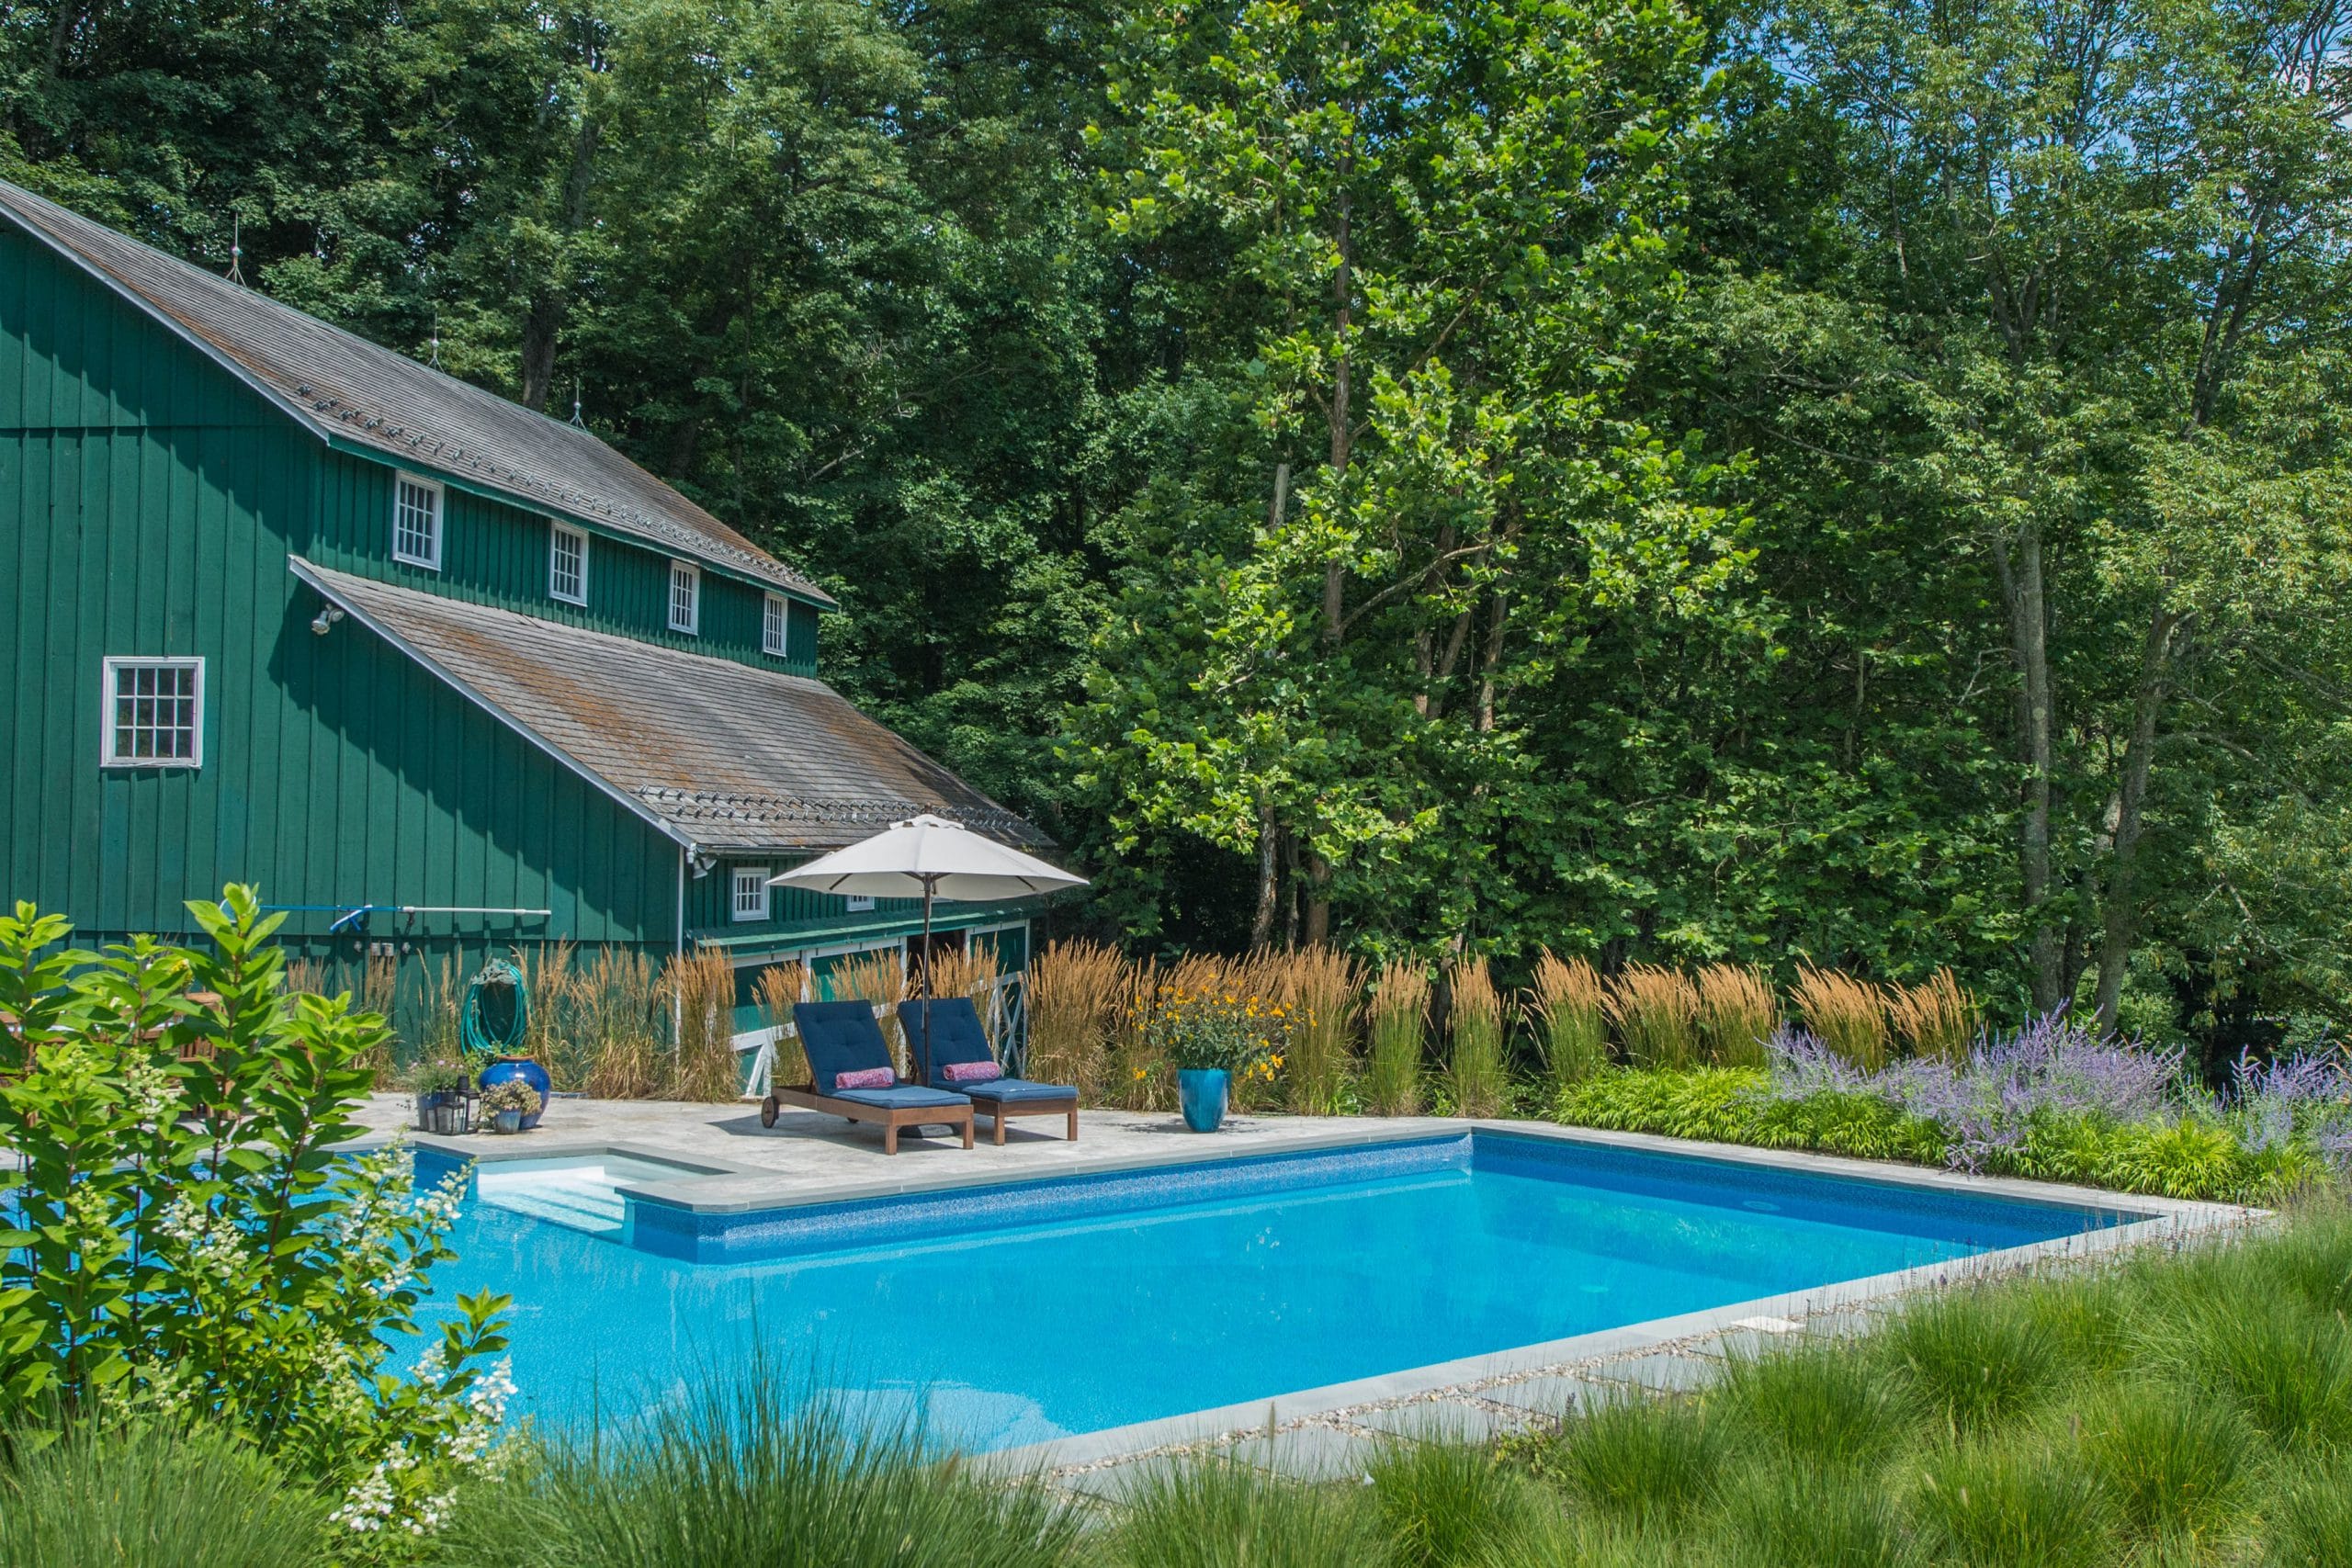 42 69 Philhower Road -- pool and barn BZ